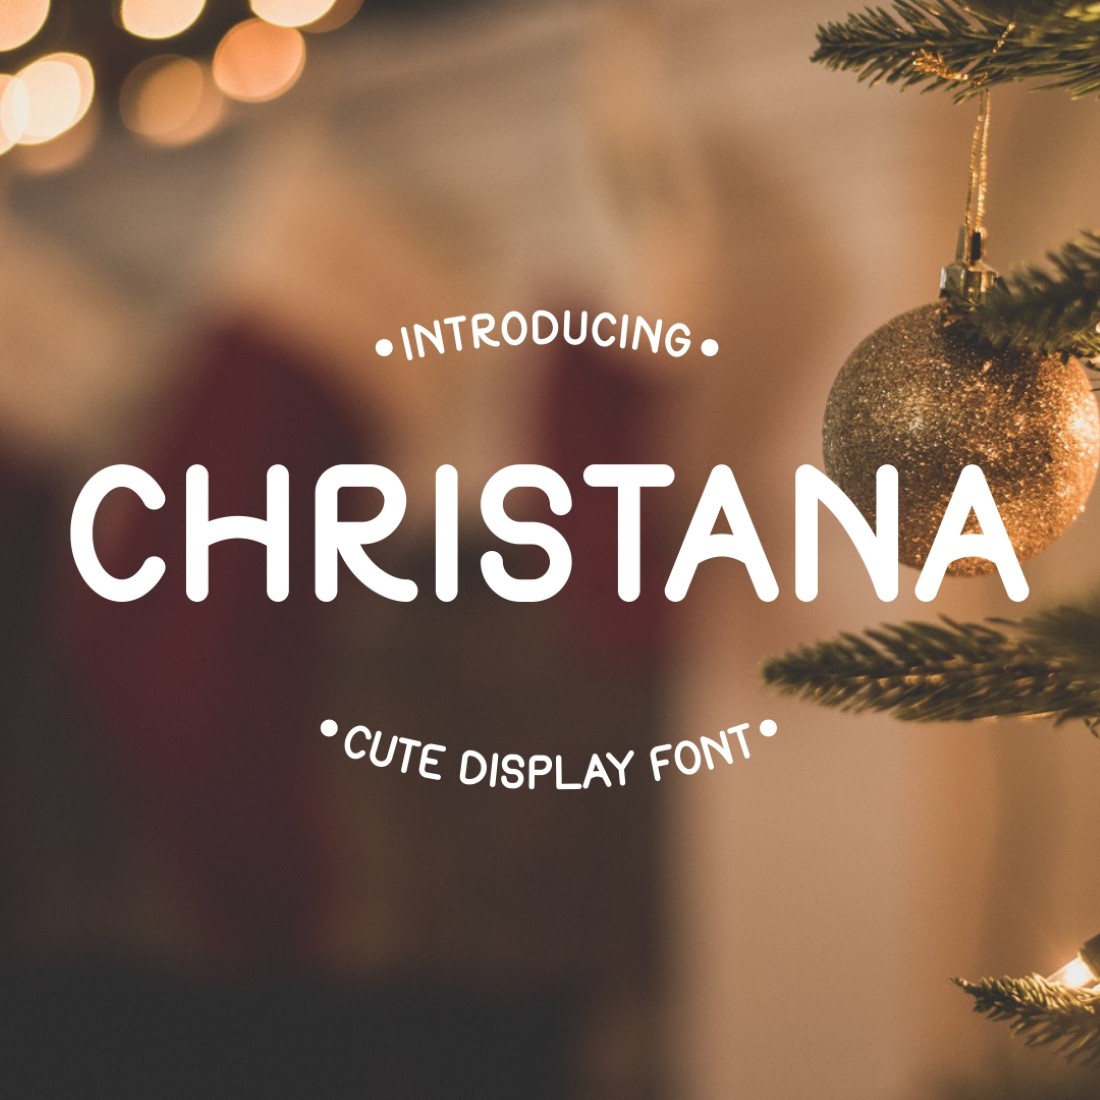 Christana - Cute Display Font cover image.